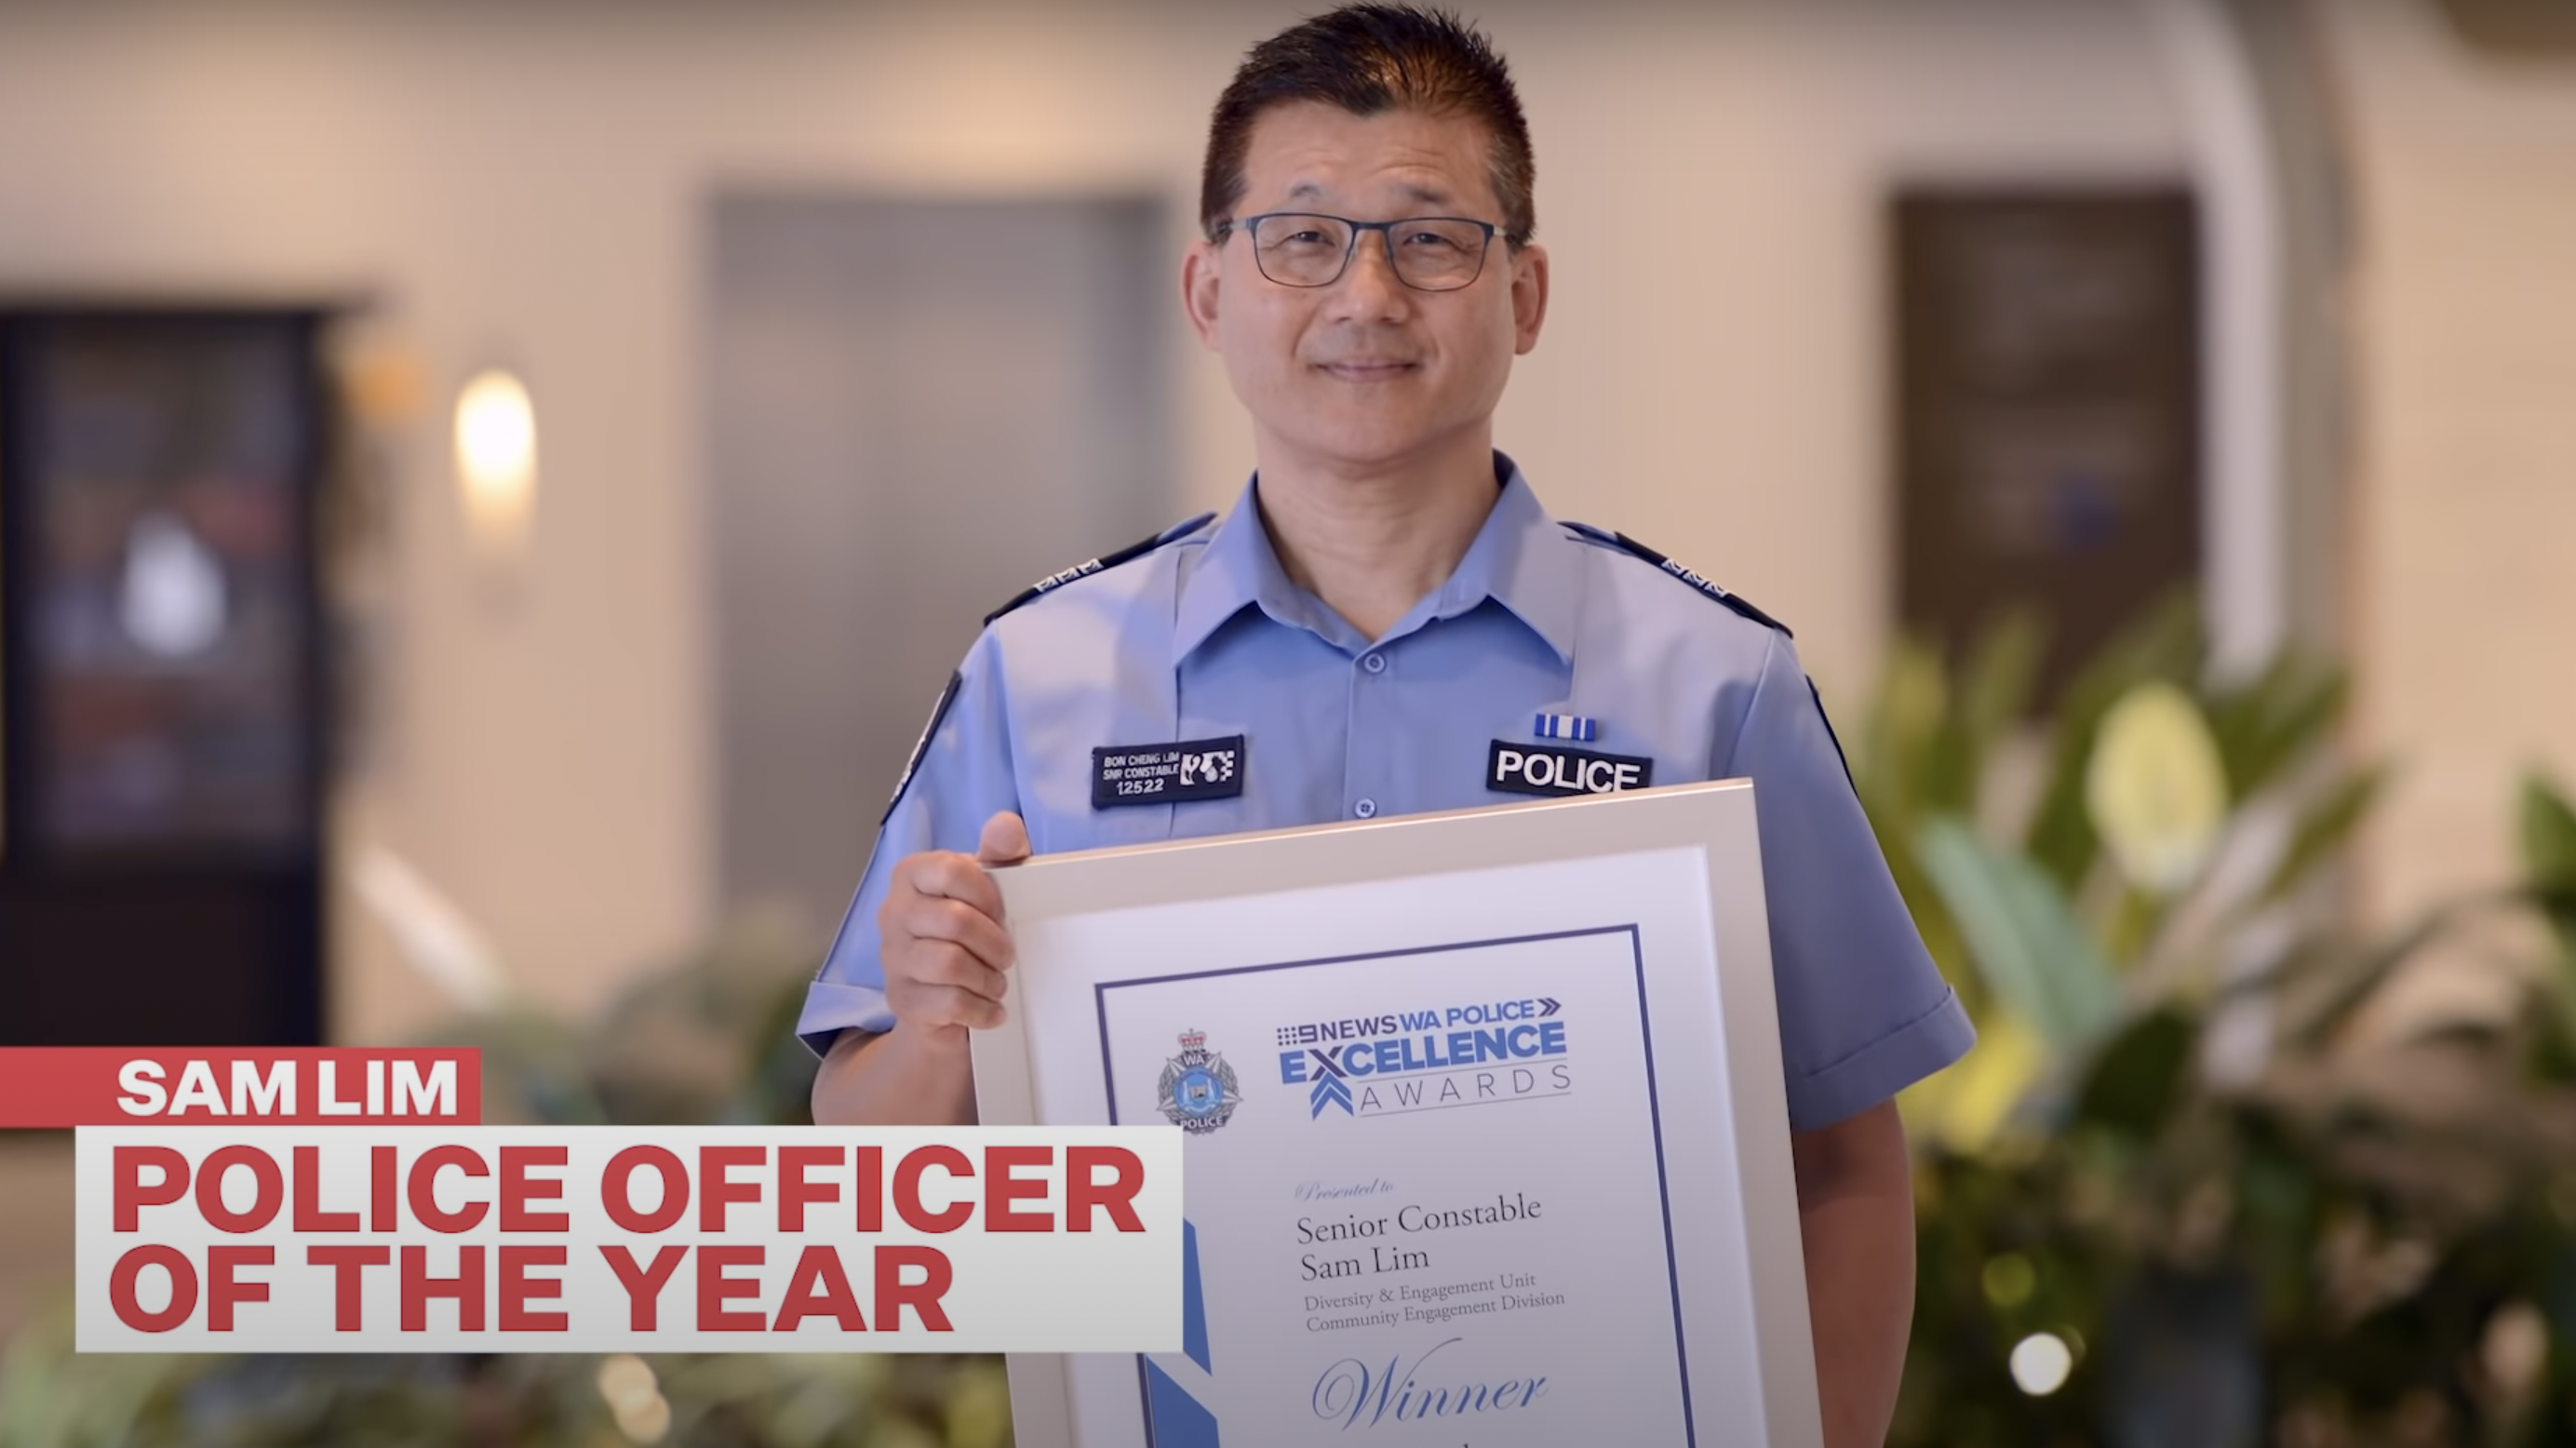 Lim was named Police Officer of the Year in 2020